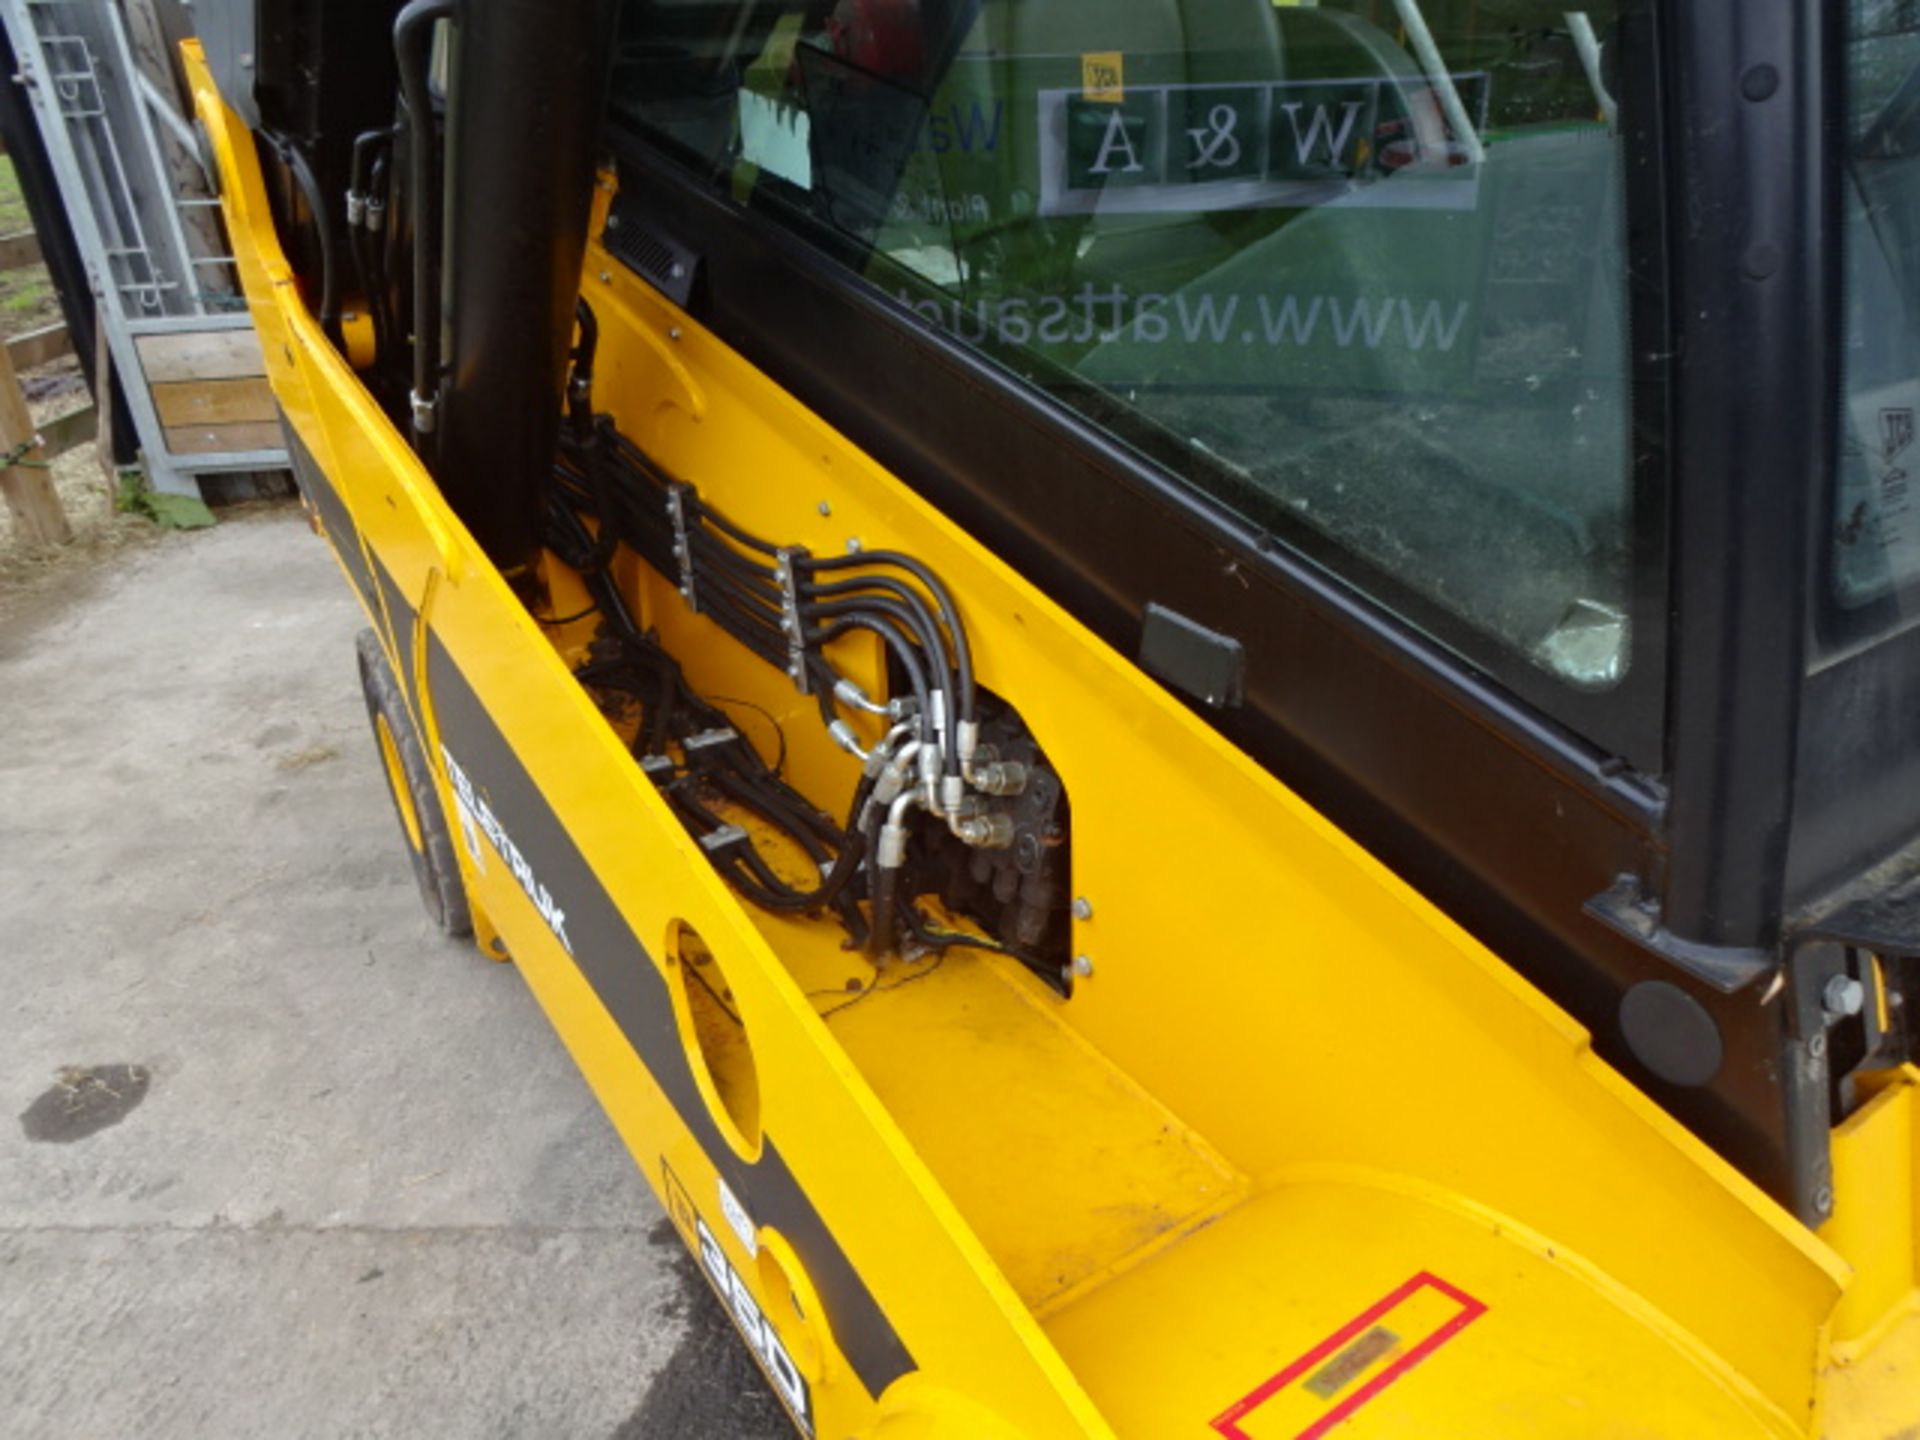 2012 JCB TLT35 Wastemaster 3.5t diesel driven telescopic forklift truck S/n: E01541170 with - Image 9 of 10